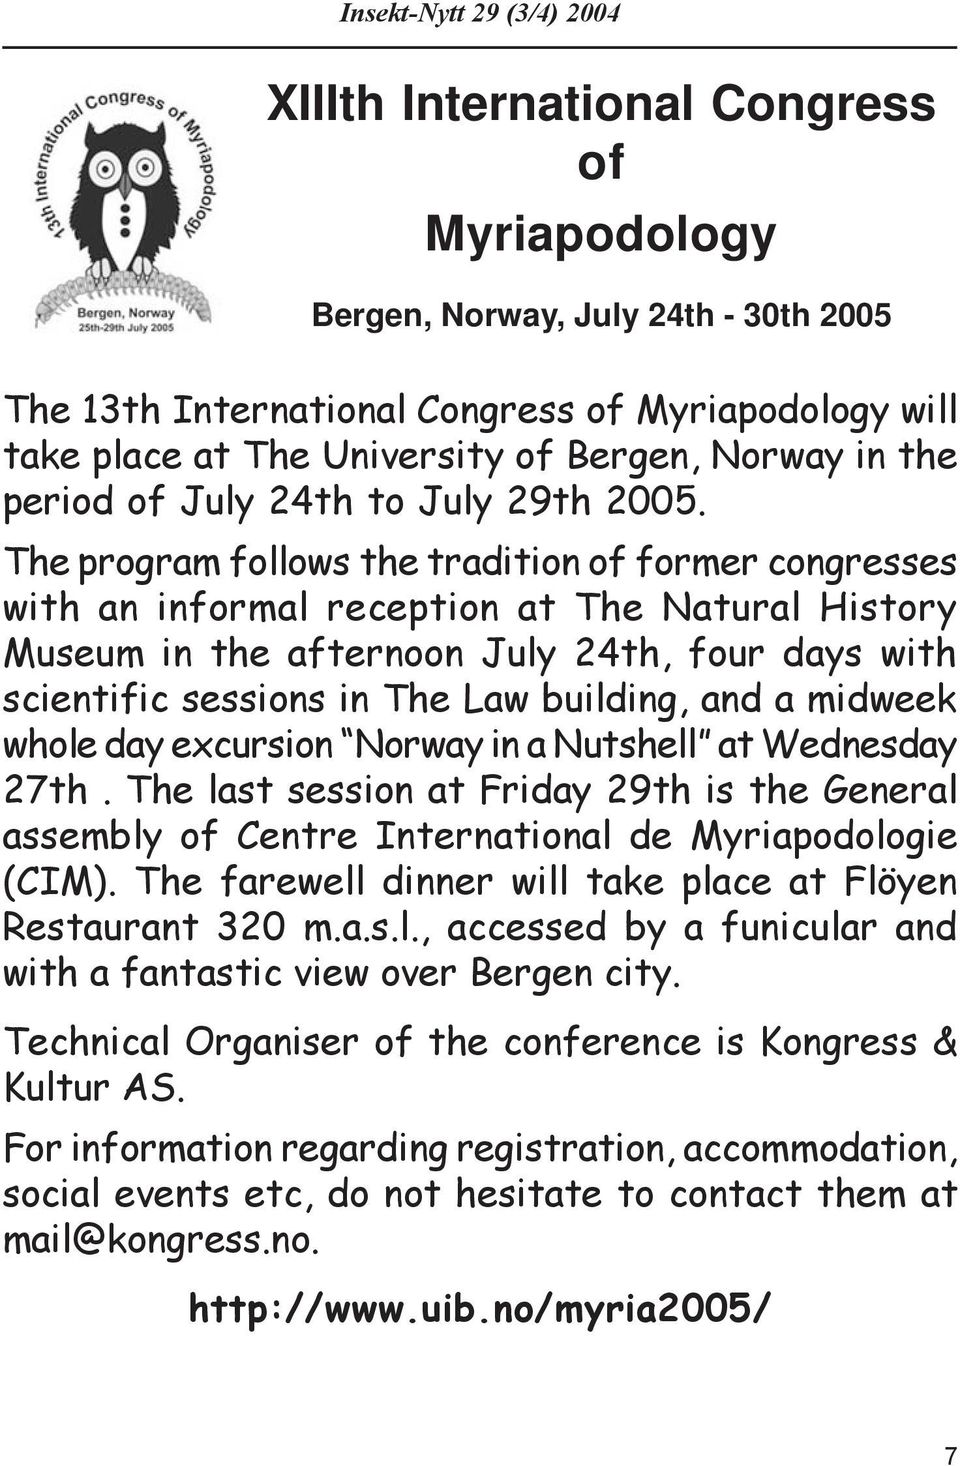 The program follows the tradition of former congresses with an informal reception at The Natural History Museum in the afternoon July 24th, four days with scientific sessions in The Law building, and